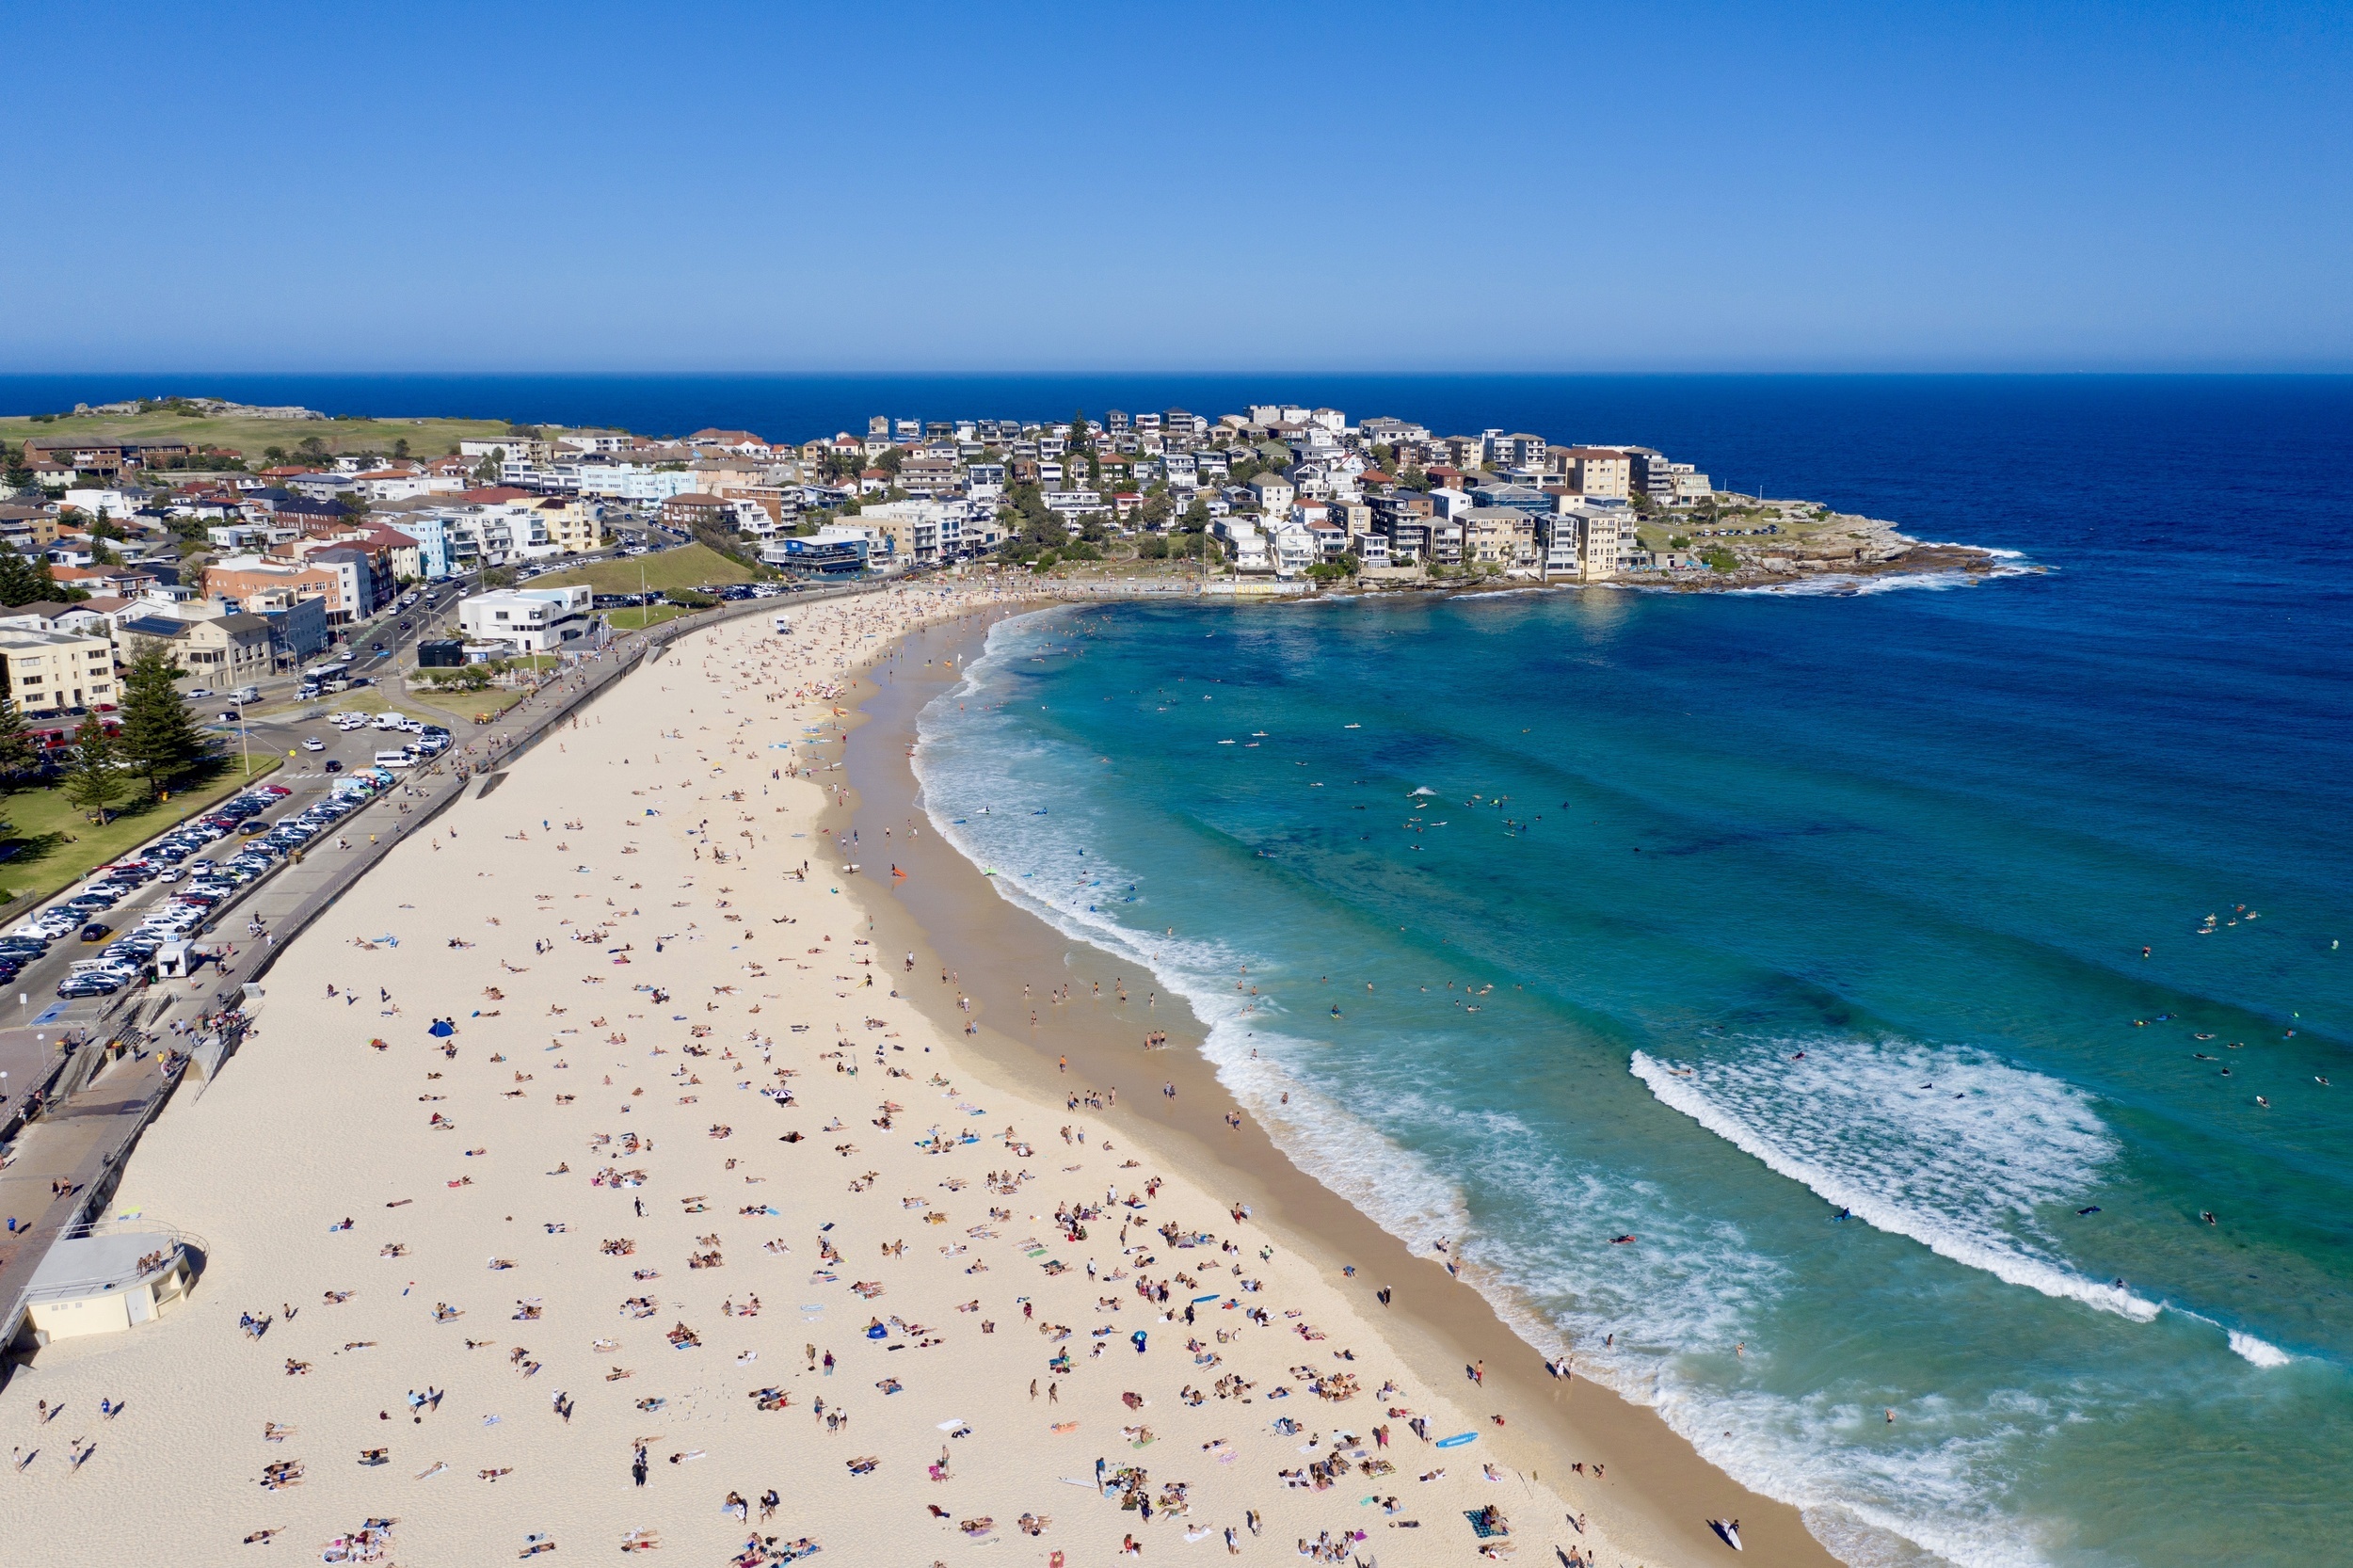 <p>Grab a surfboard, brah. You're in Sydney! One of the first things you think of when you think of Sydney is surfing, so why not rent a board and catch some waves? There are surf breaks for everyone.</p><p><a href='https://www.msn.com/en-us/community/channel/vid-cj9pqbr0vn9in2b6ddcd8sfgpfq6x6utp44fssrv6mc2gtybw0us'>Follow us on MSN to see more of our exclusive lifestyle content.</a></p>